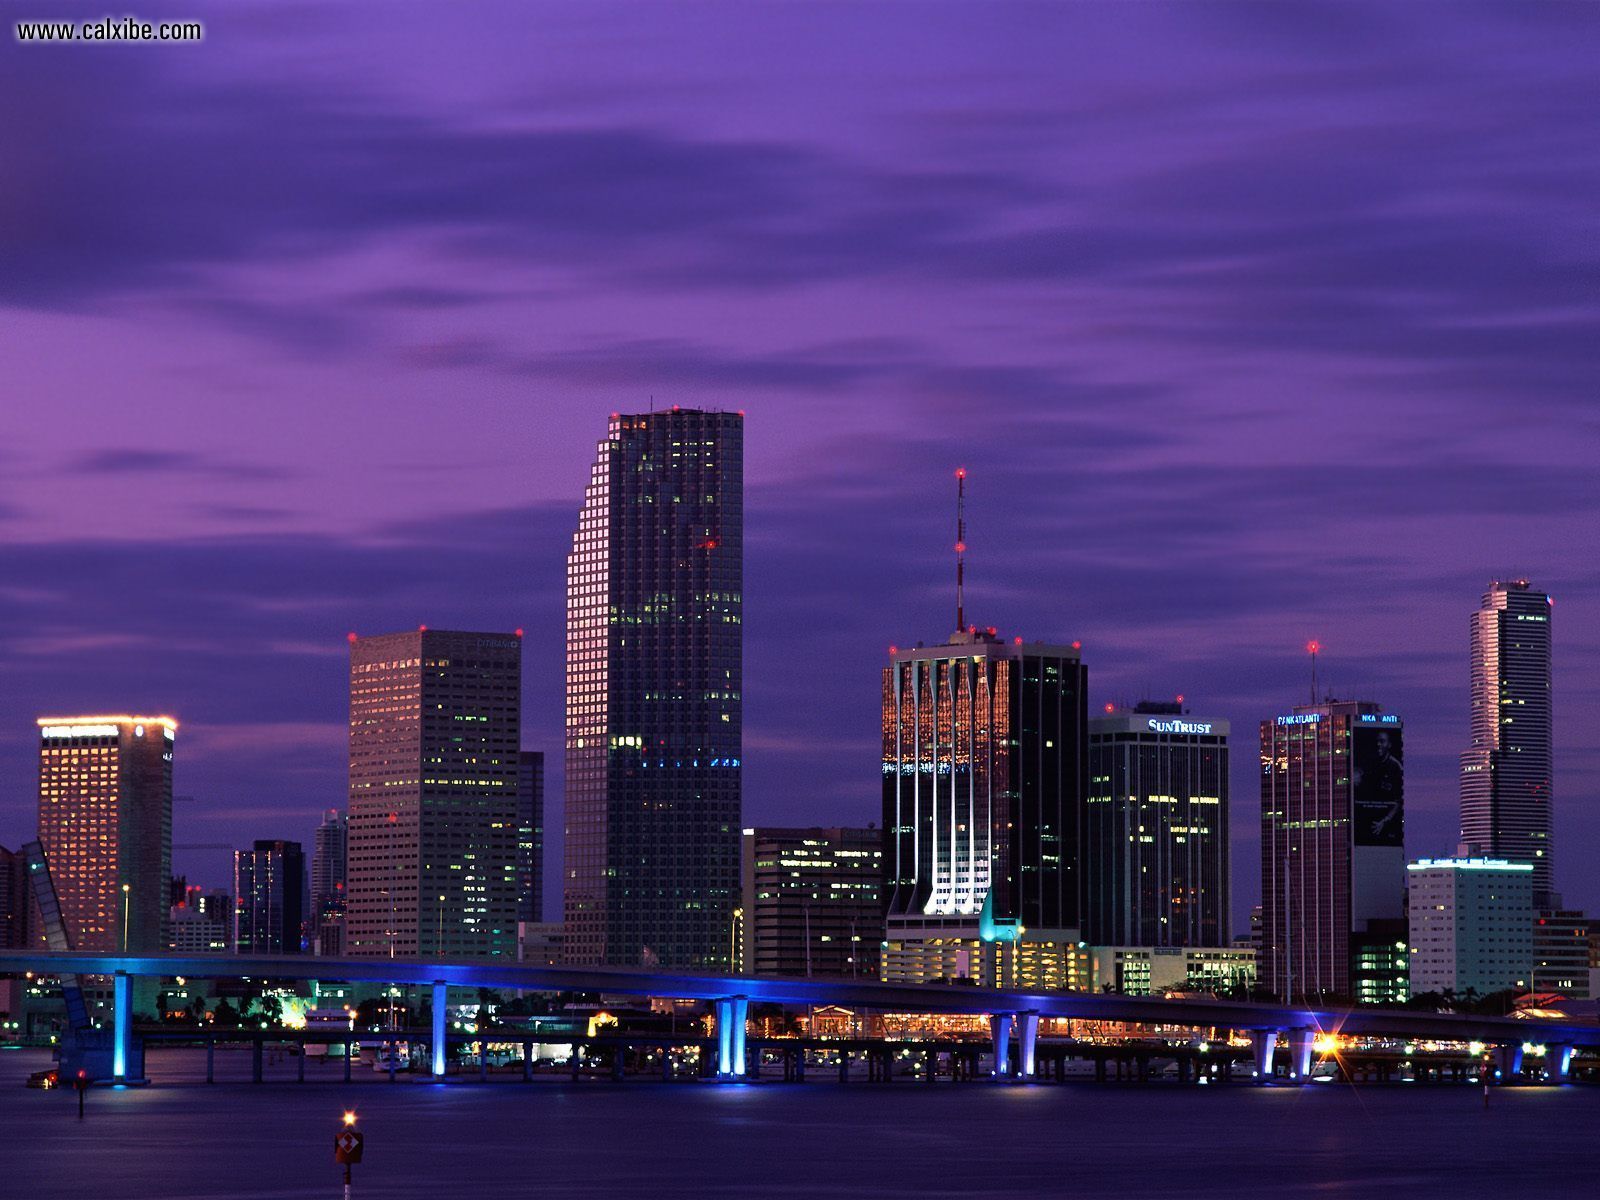 Buildings & City: Miami Nights Florida, picture nr. 7012